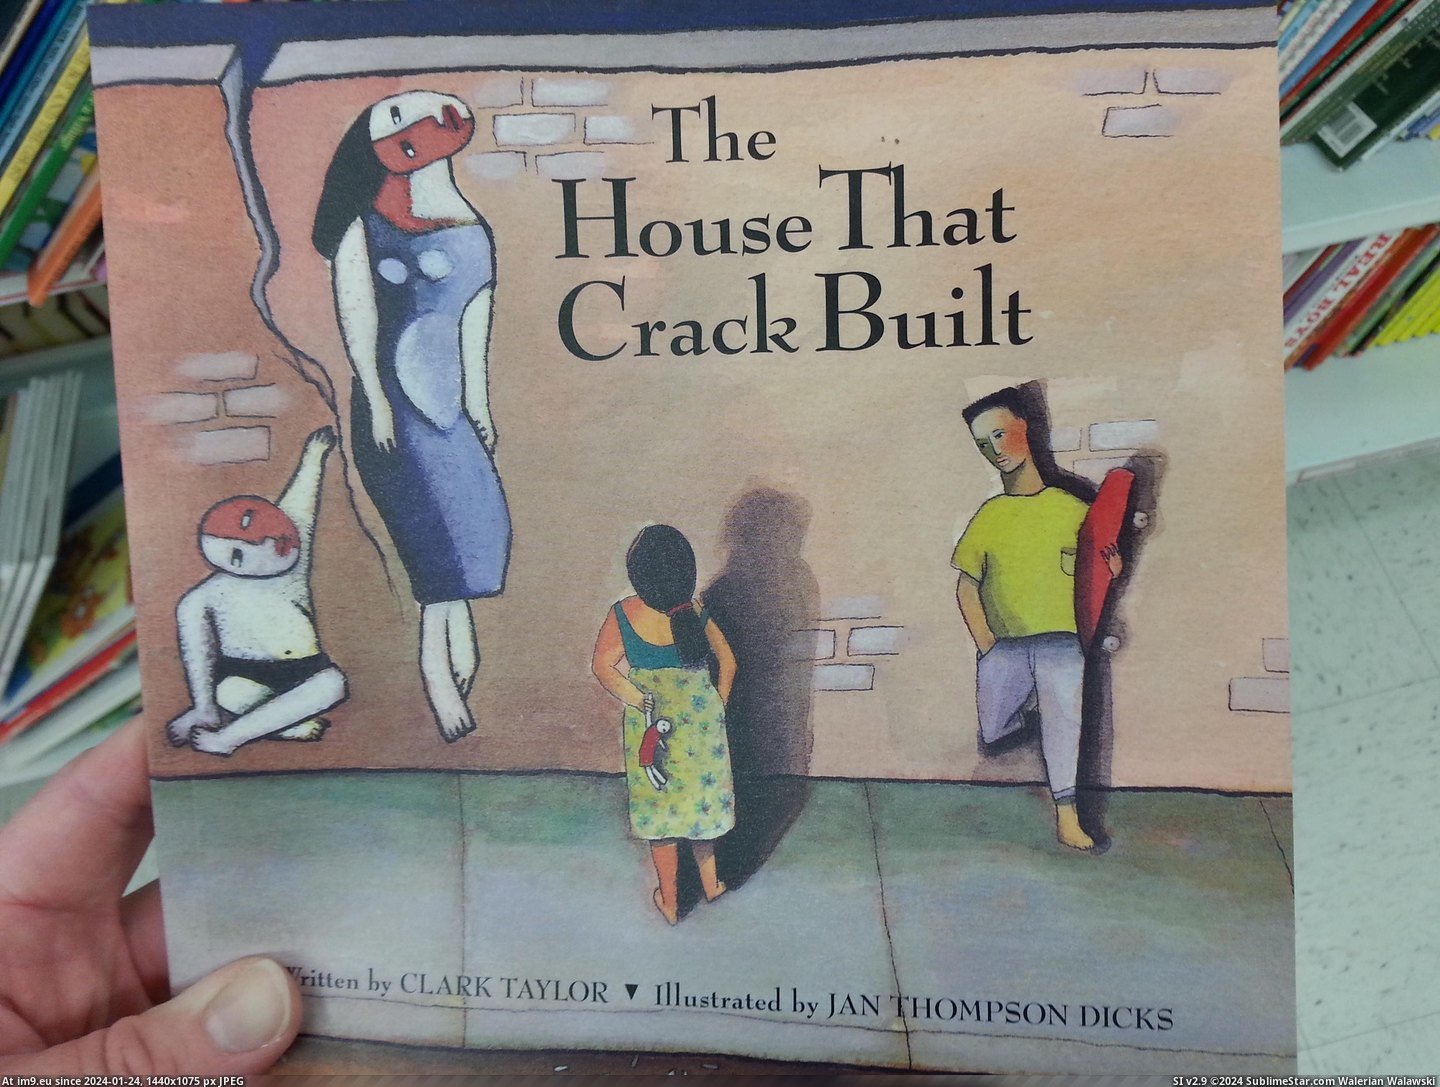 #Wtf #Store #Thrift #Crack #Book #Children [Wtf] Found this children's book about crack at a thrift store today 4 Pic. (Image of album My r/WTF favs))